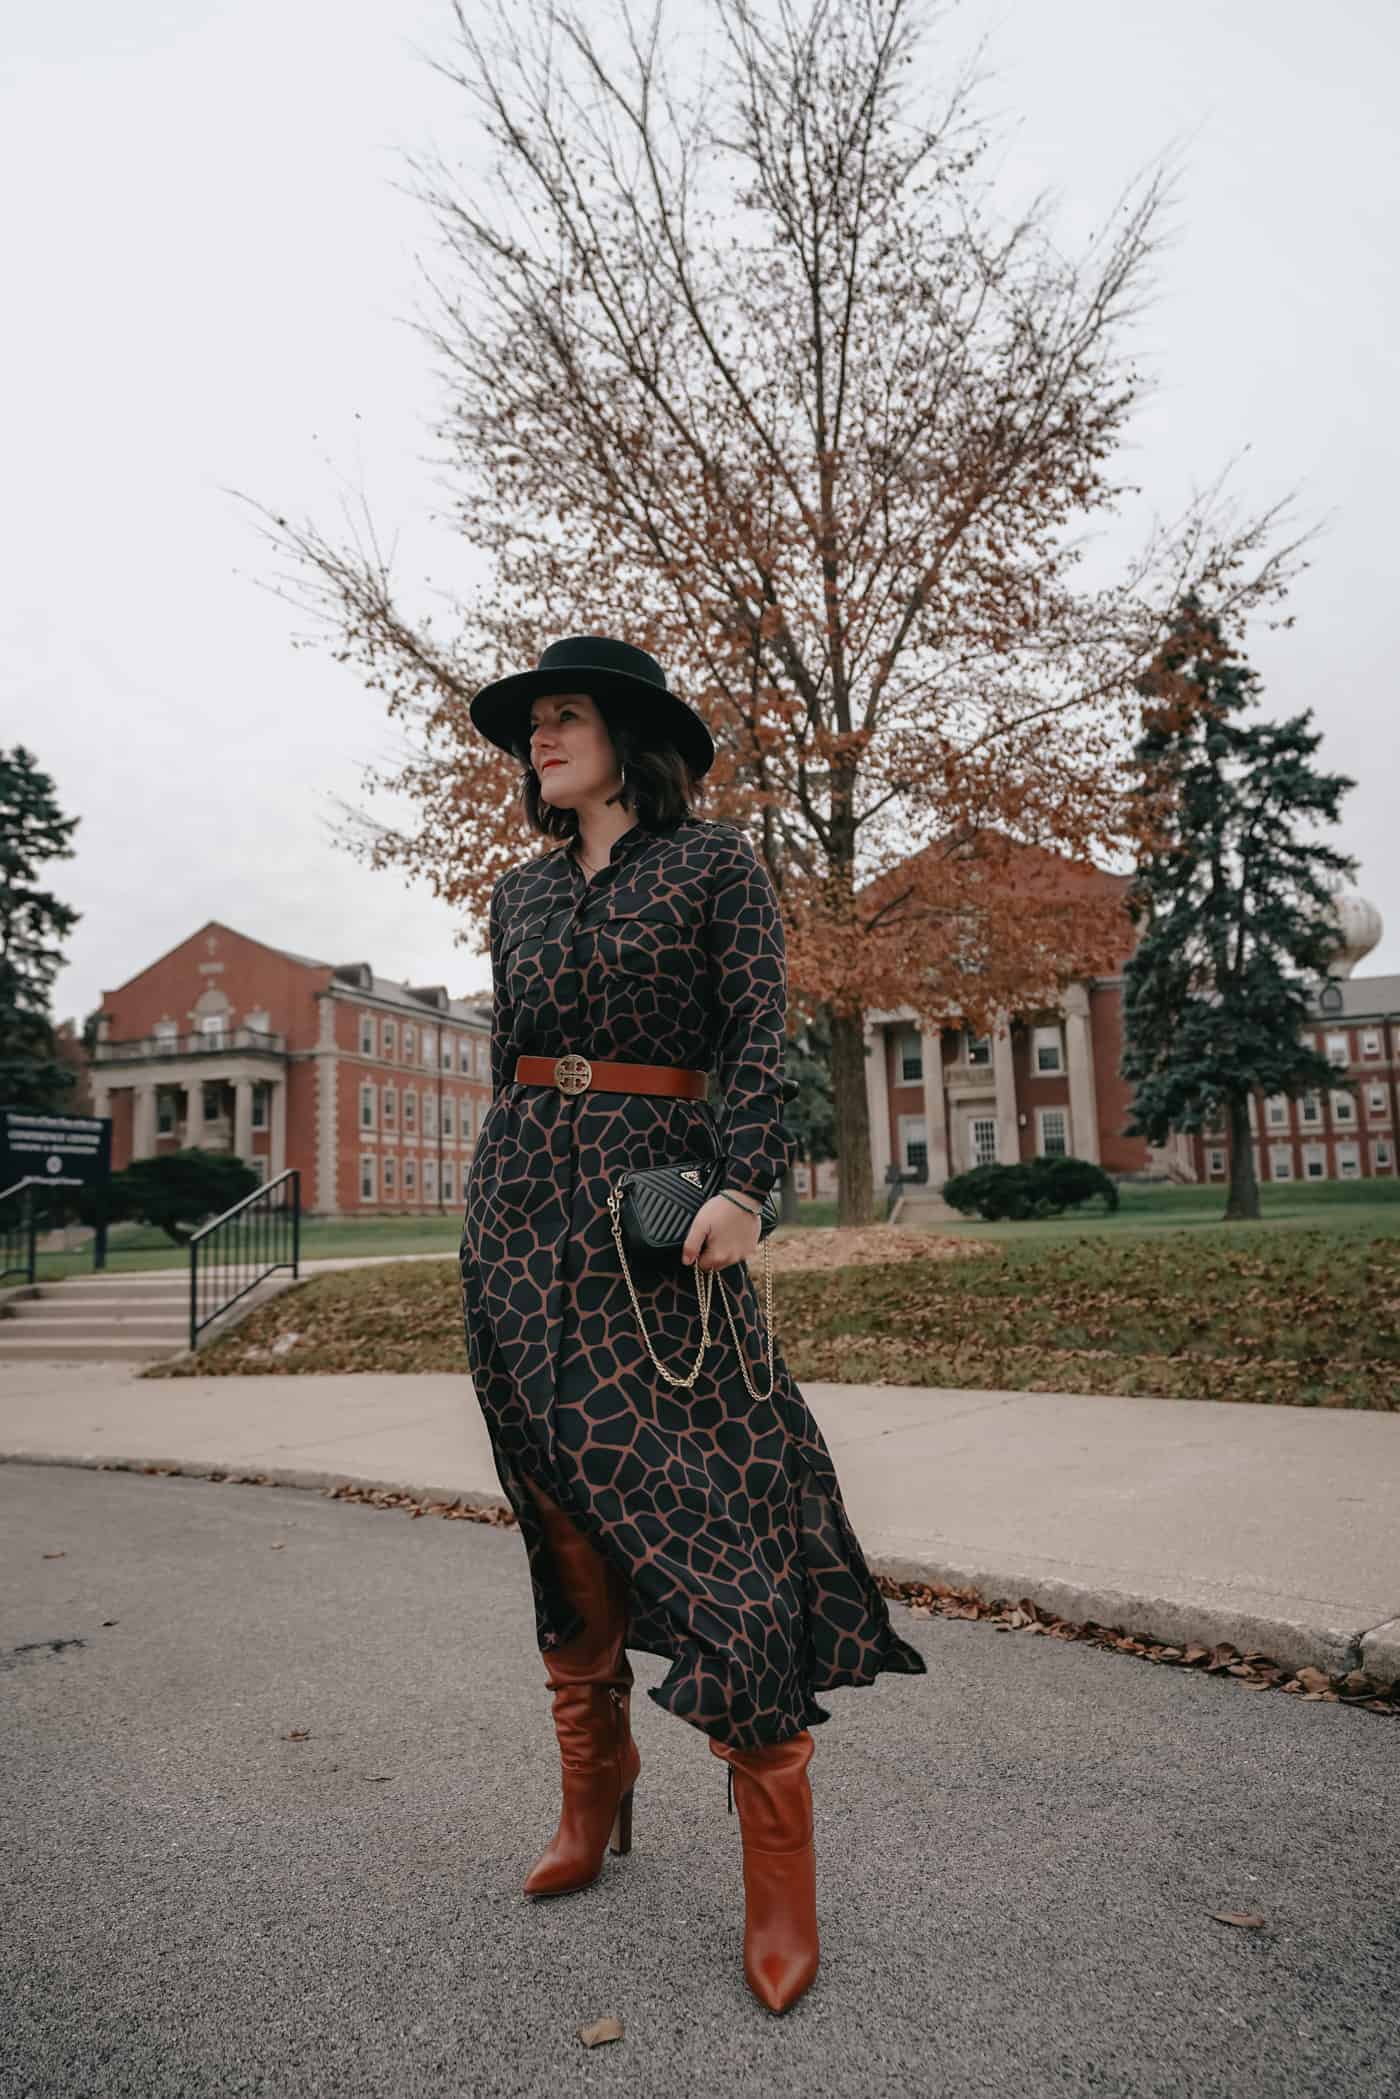 Anna Baun of A Lily Love Affair sharing 20 affordable dresses with sleeves that are perfect for Fall and Winter. Plus, a great Nordstrom giveaway! #Dresses #DressesWithSleeves #FallDresses #WinterDresses #PetiteDresses